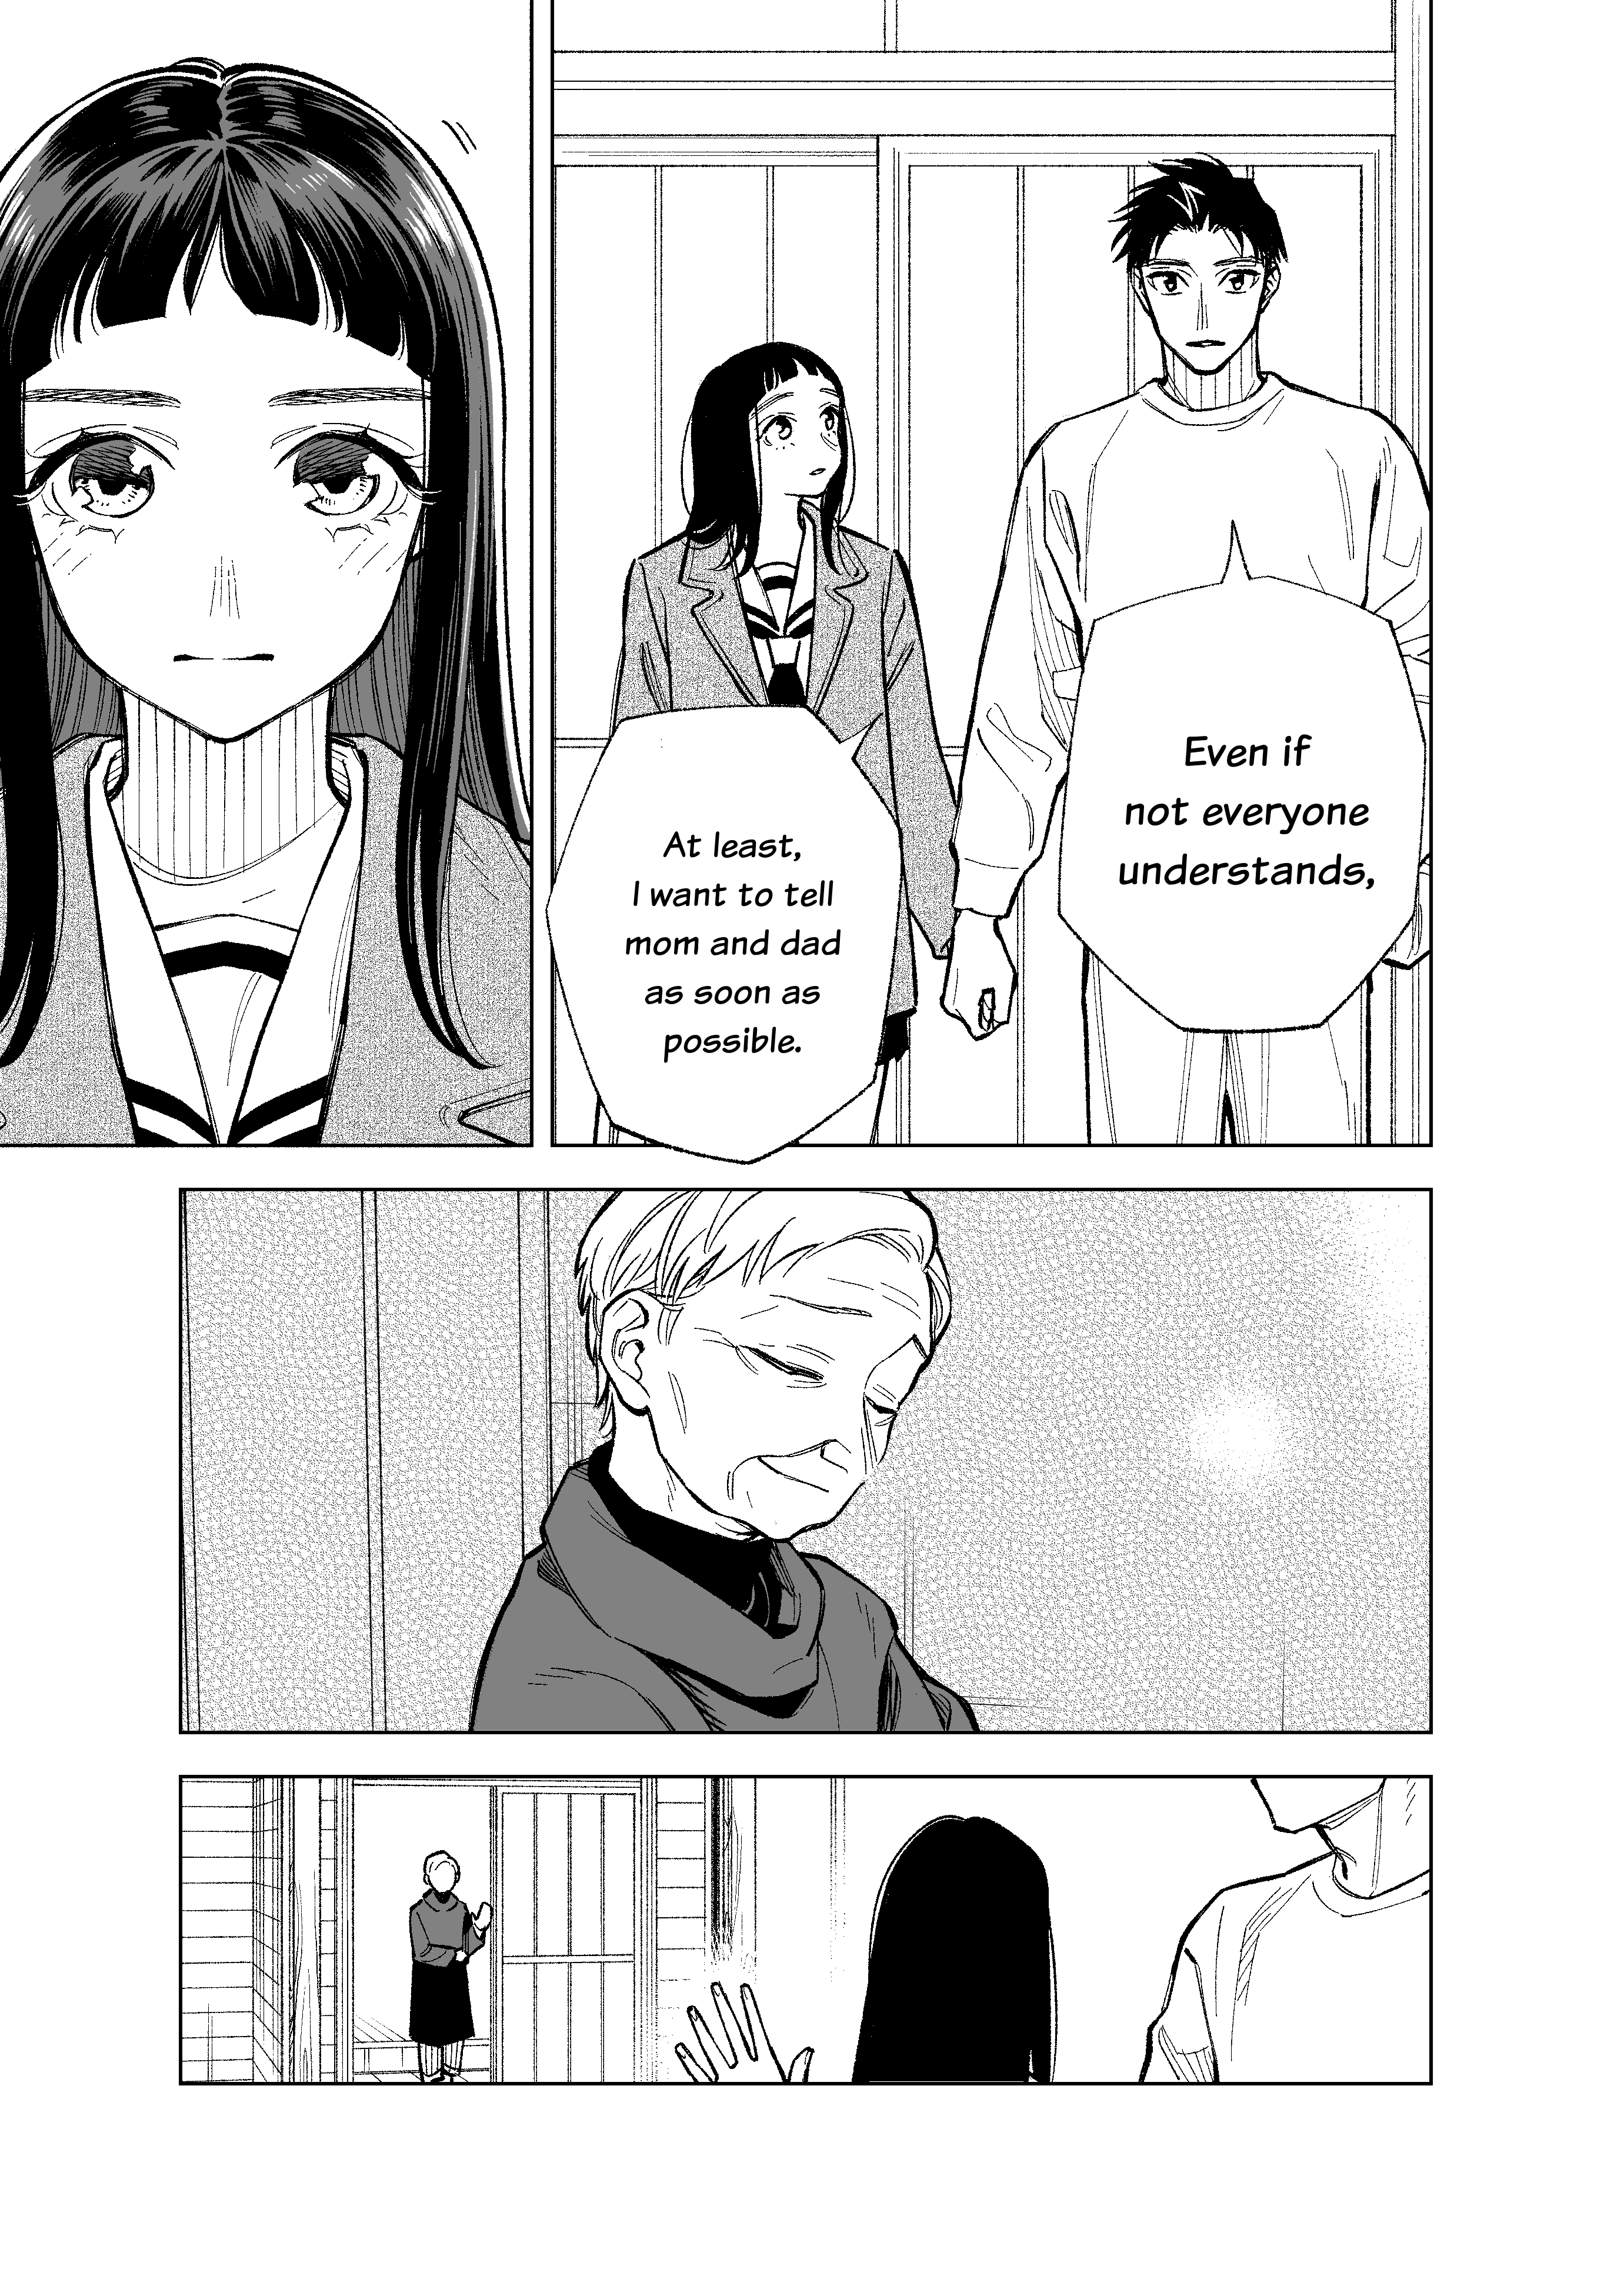 The Twins' Circumstances - 93 page 6-0f9a5815